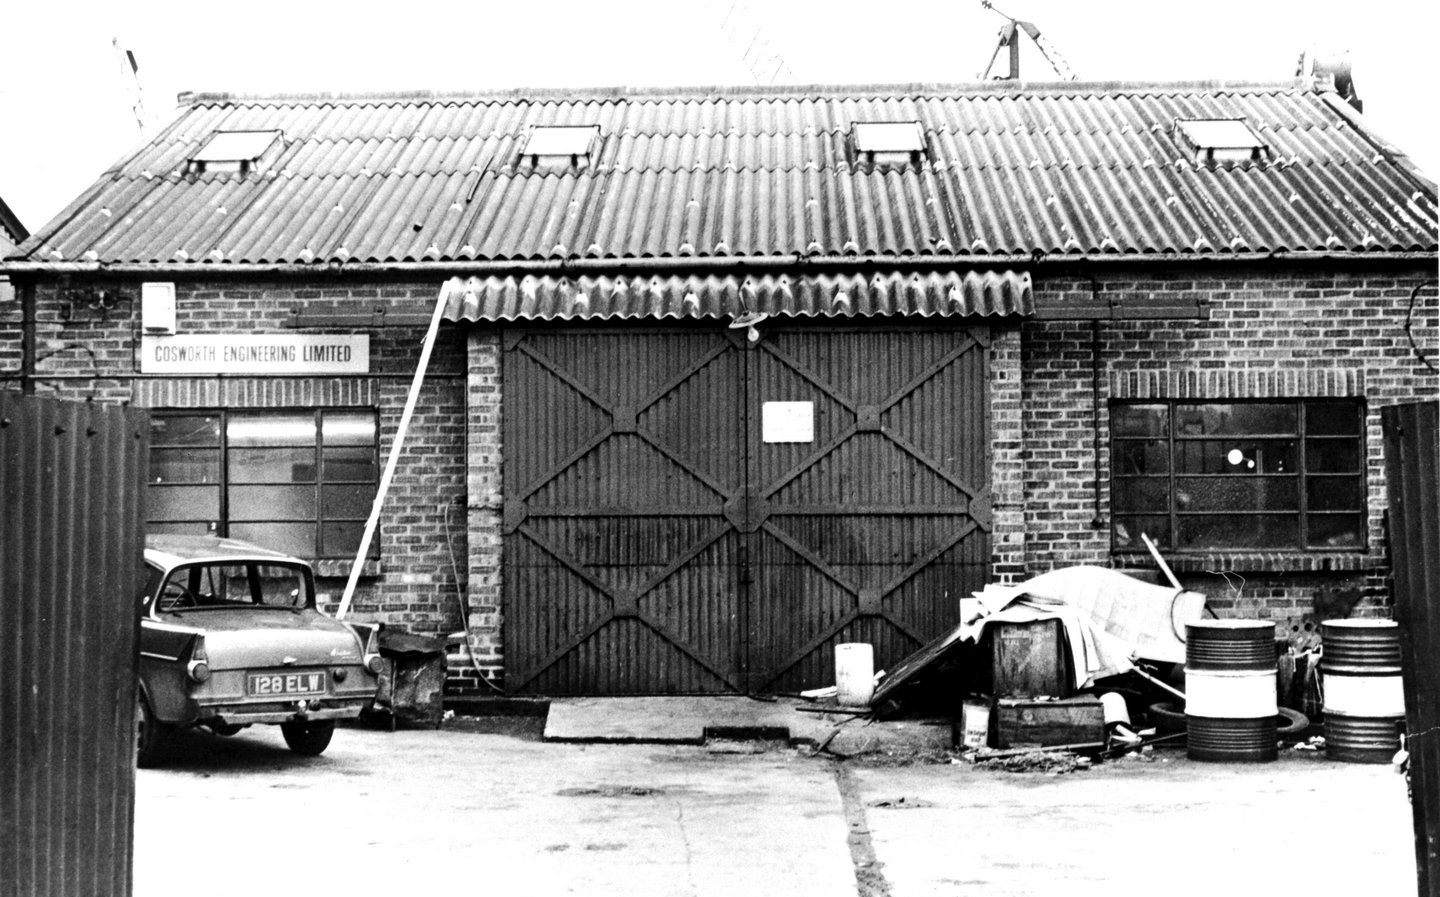 Early days of Cosworth Engineering